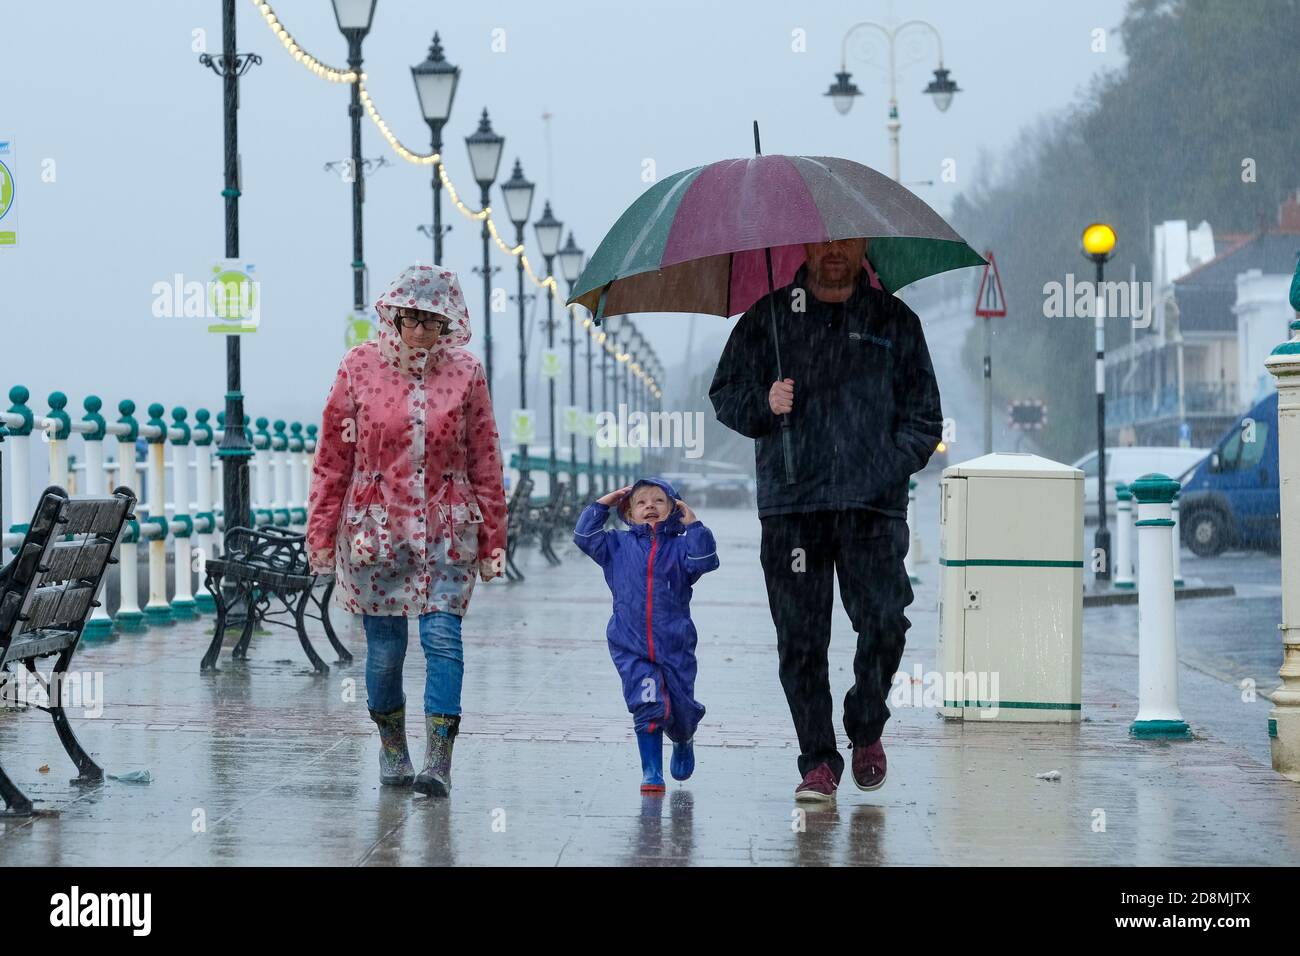 Stormy weather - Penarth, Wales UK. 31st October 2020.  The Met Office has issues a Yellow weather warning as storm Aiden batters the UK. A young child with his parents enjoying the wind and the rain on Penarth sea front. Stock Photo